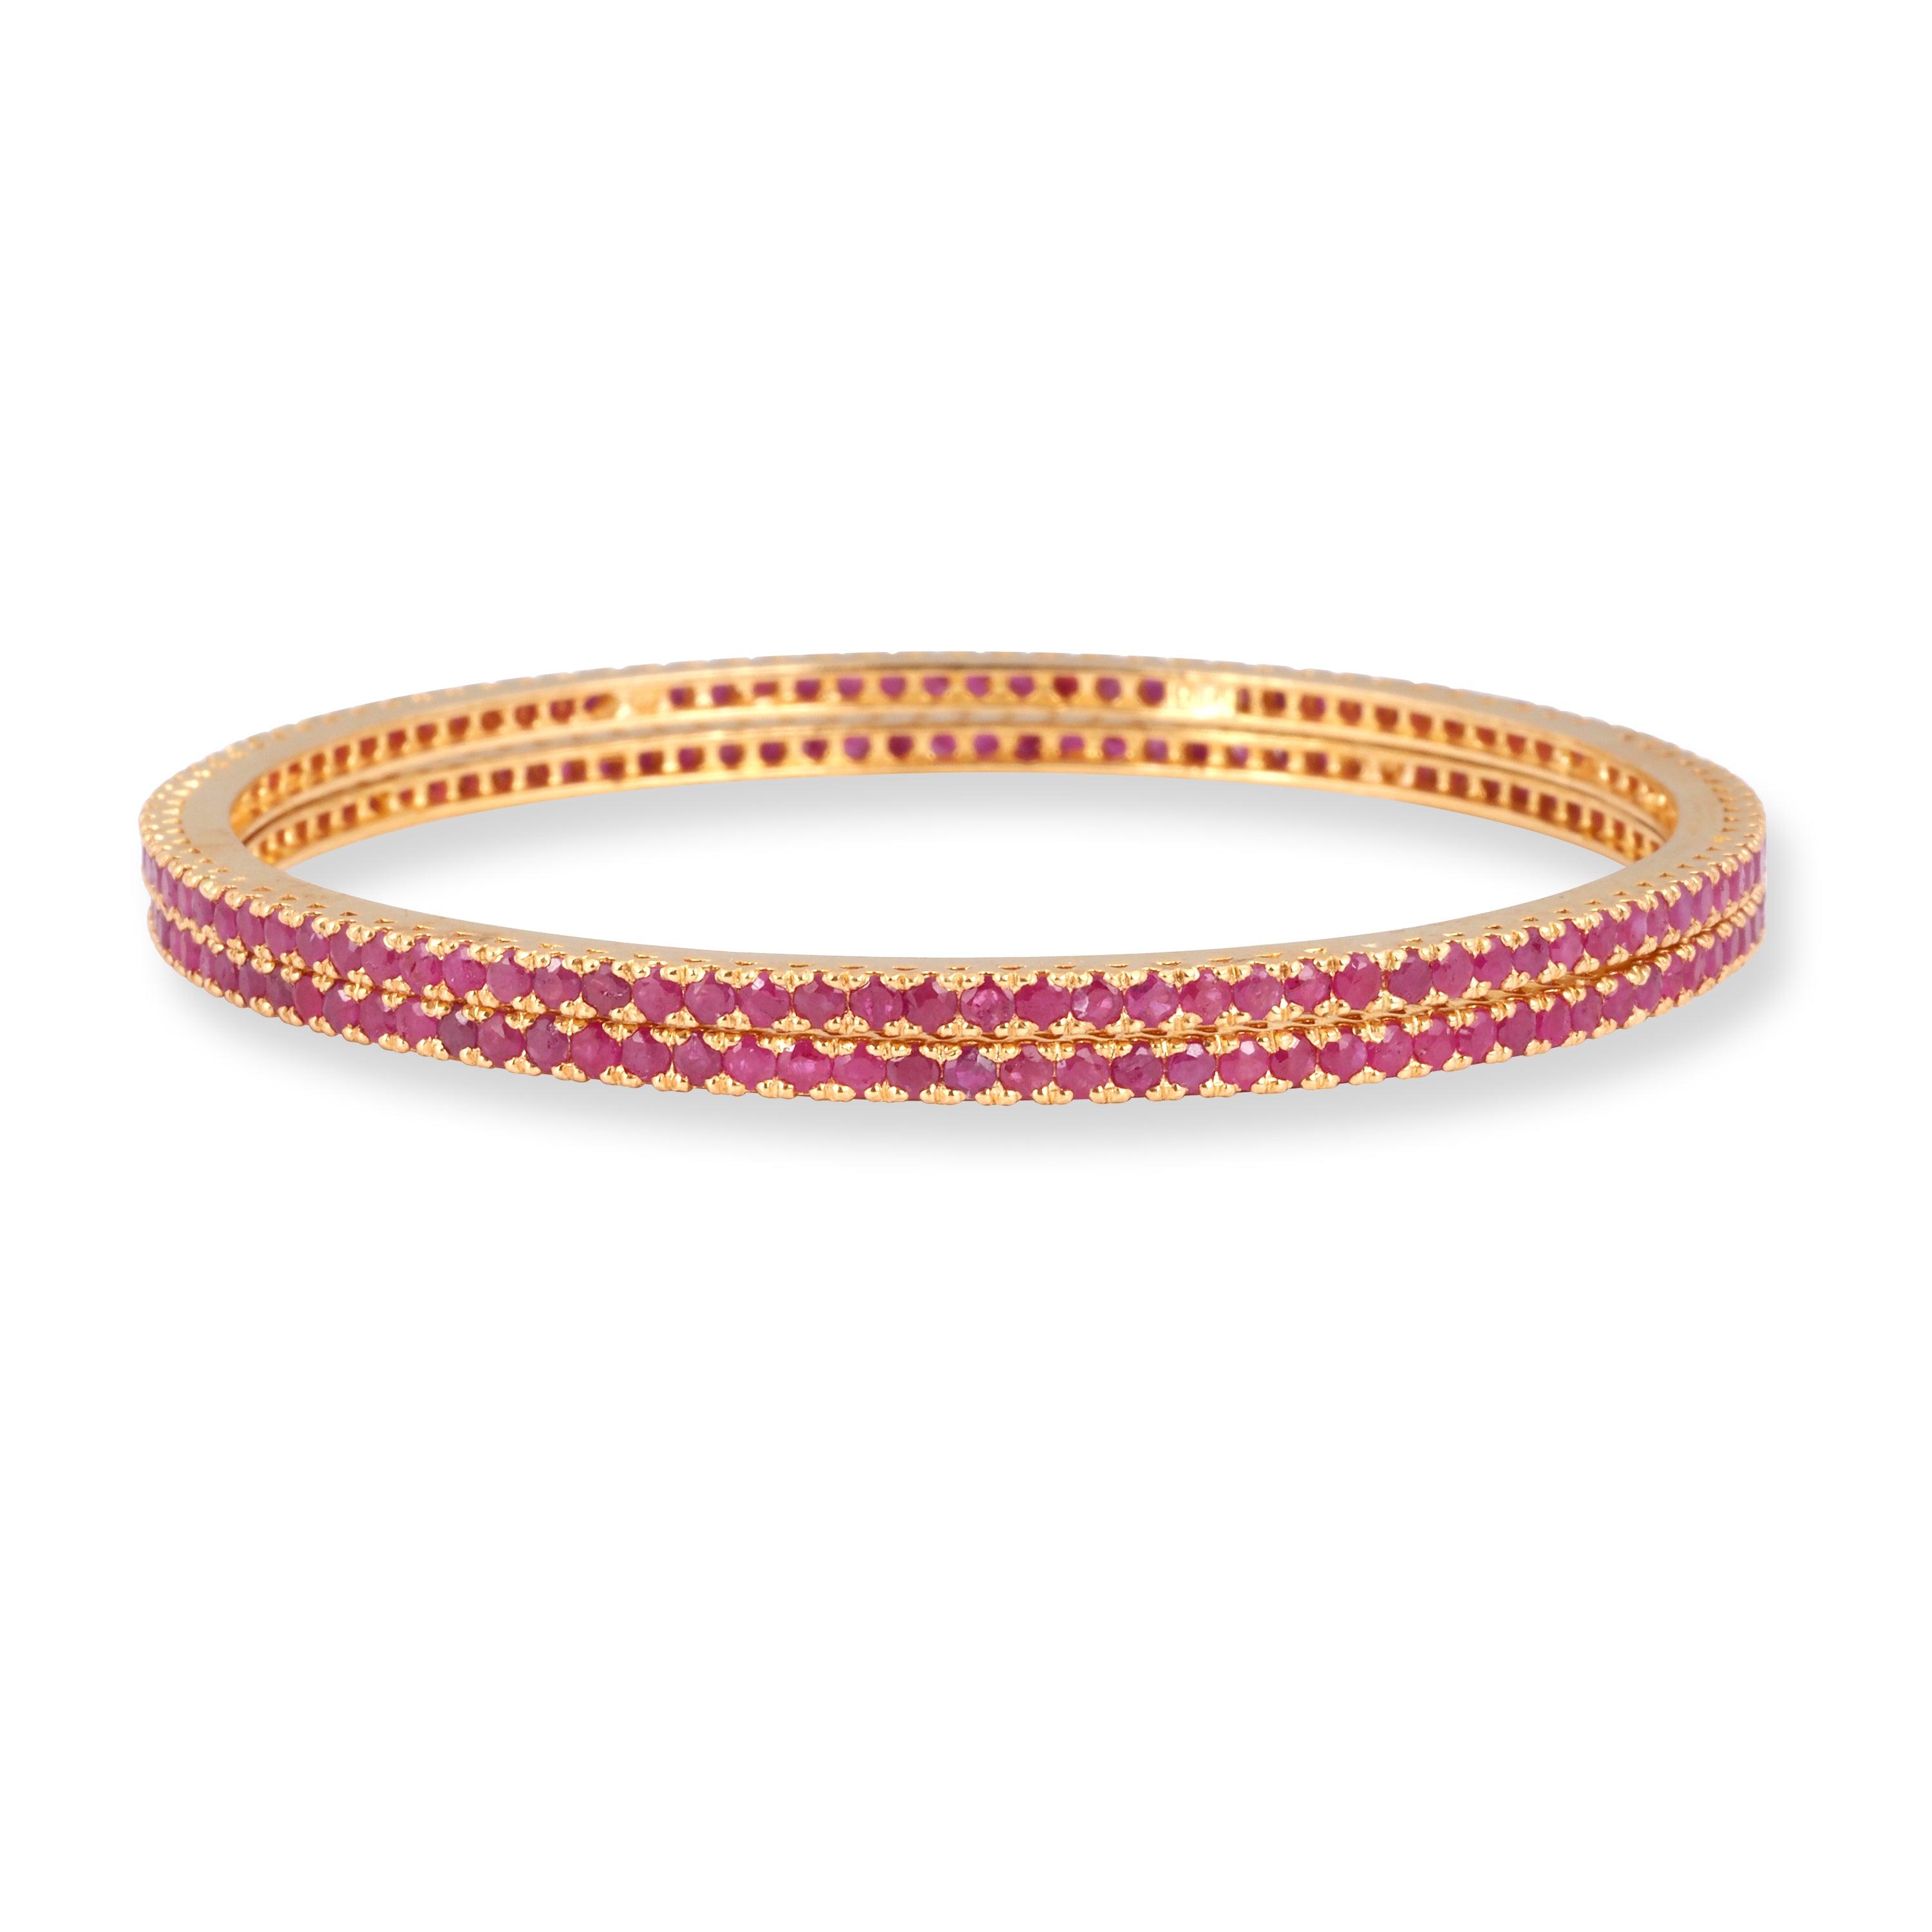 Pair of 22ct Gold Bangles with Pink Stones B-8562 - Minar Jewellers